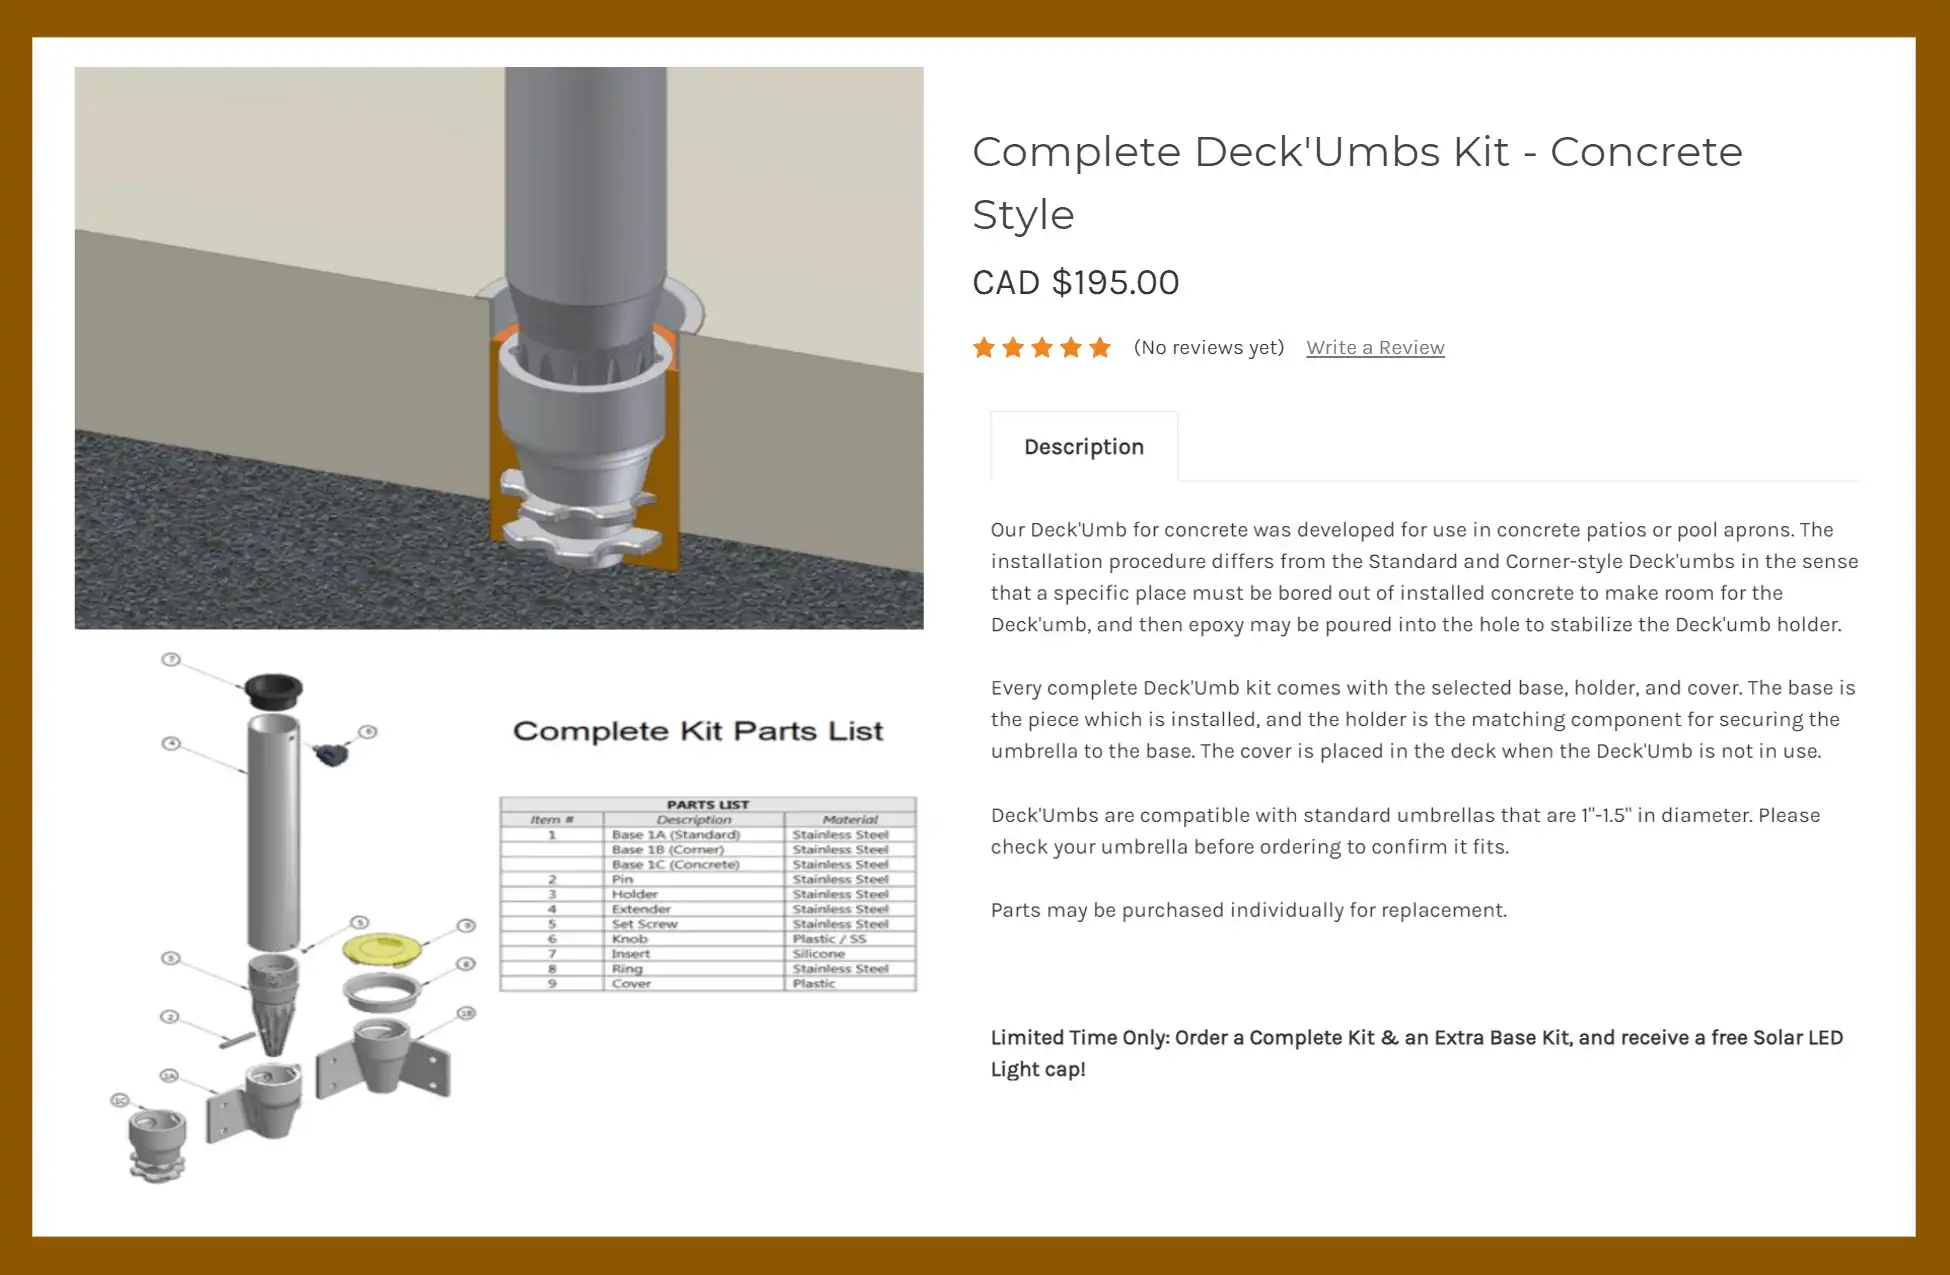 DECK'UMBS 1.5 inch Complete CONCRETE Style Kits $195